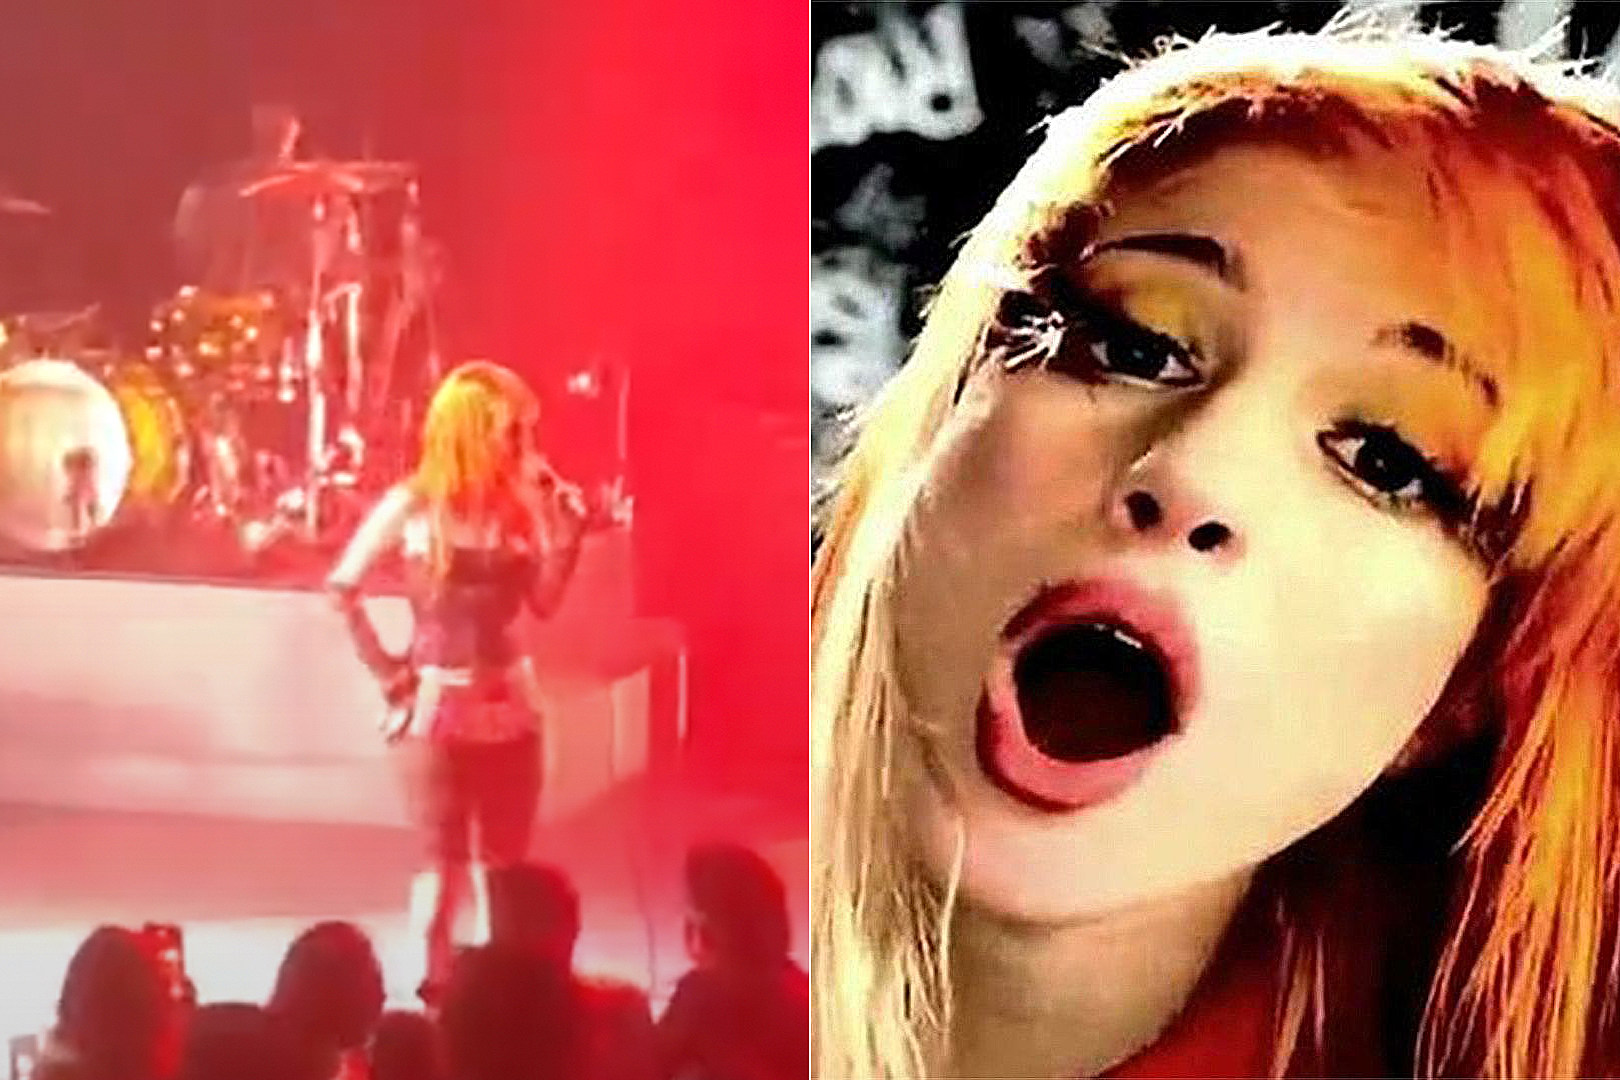 Paramore Play ‘Misery Business’ at First Show in 4 Years